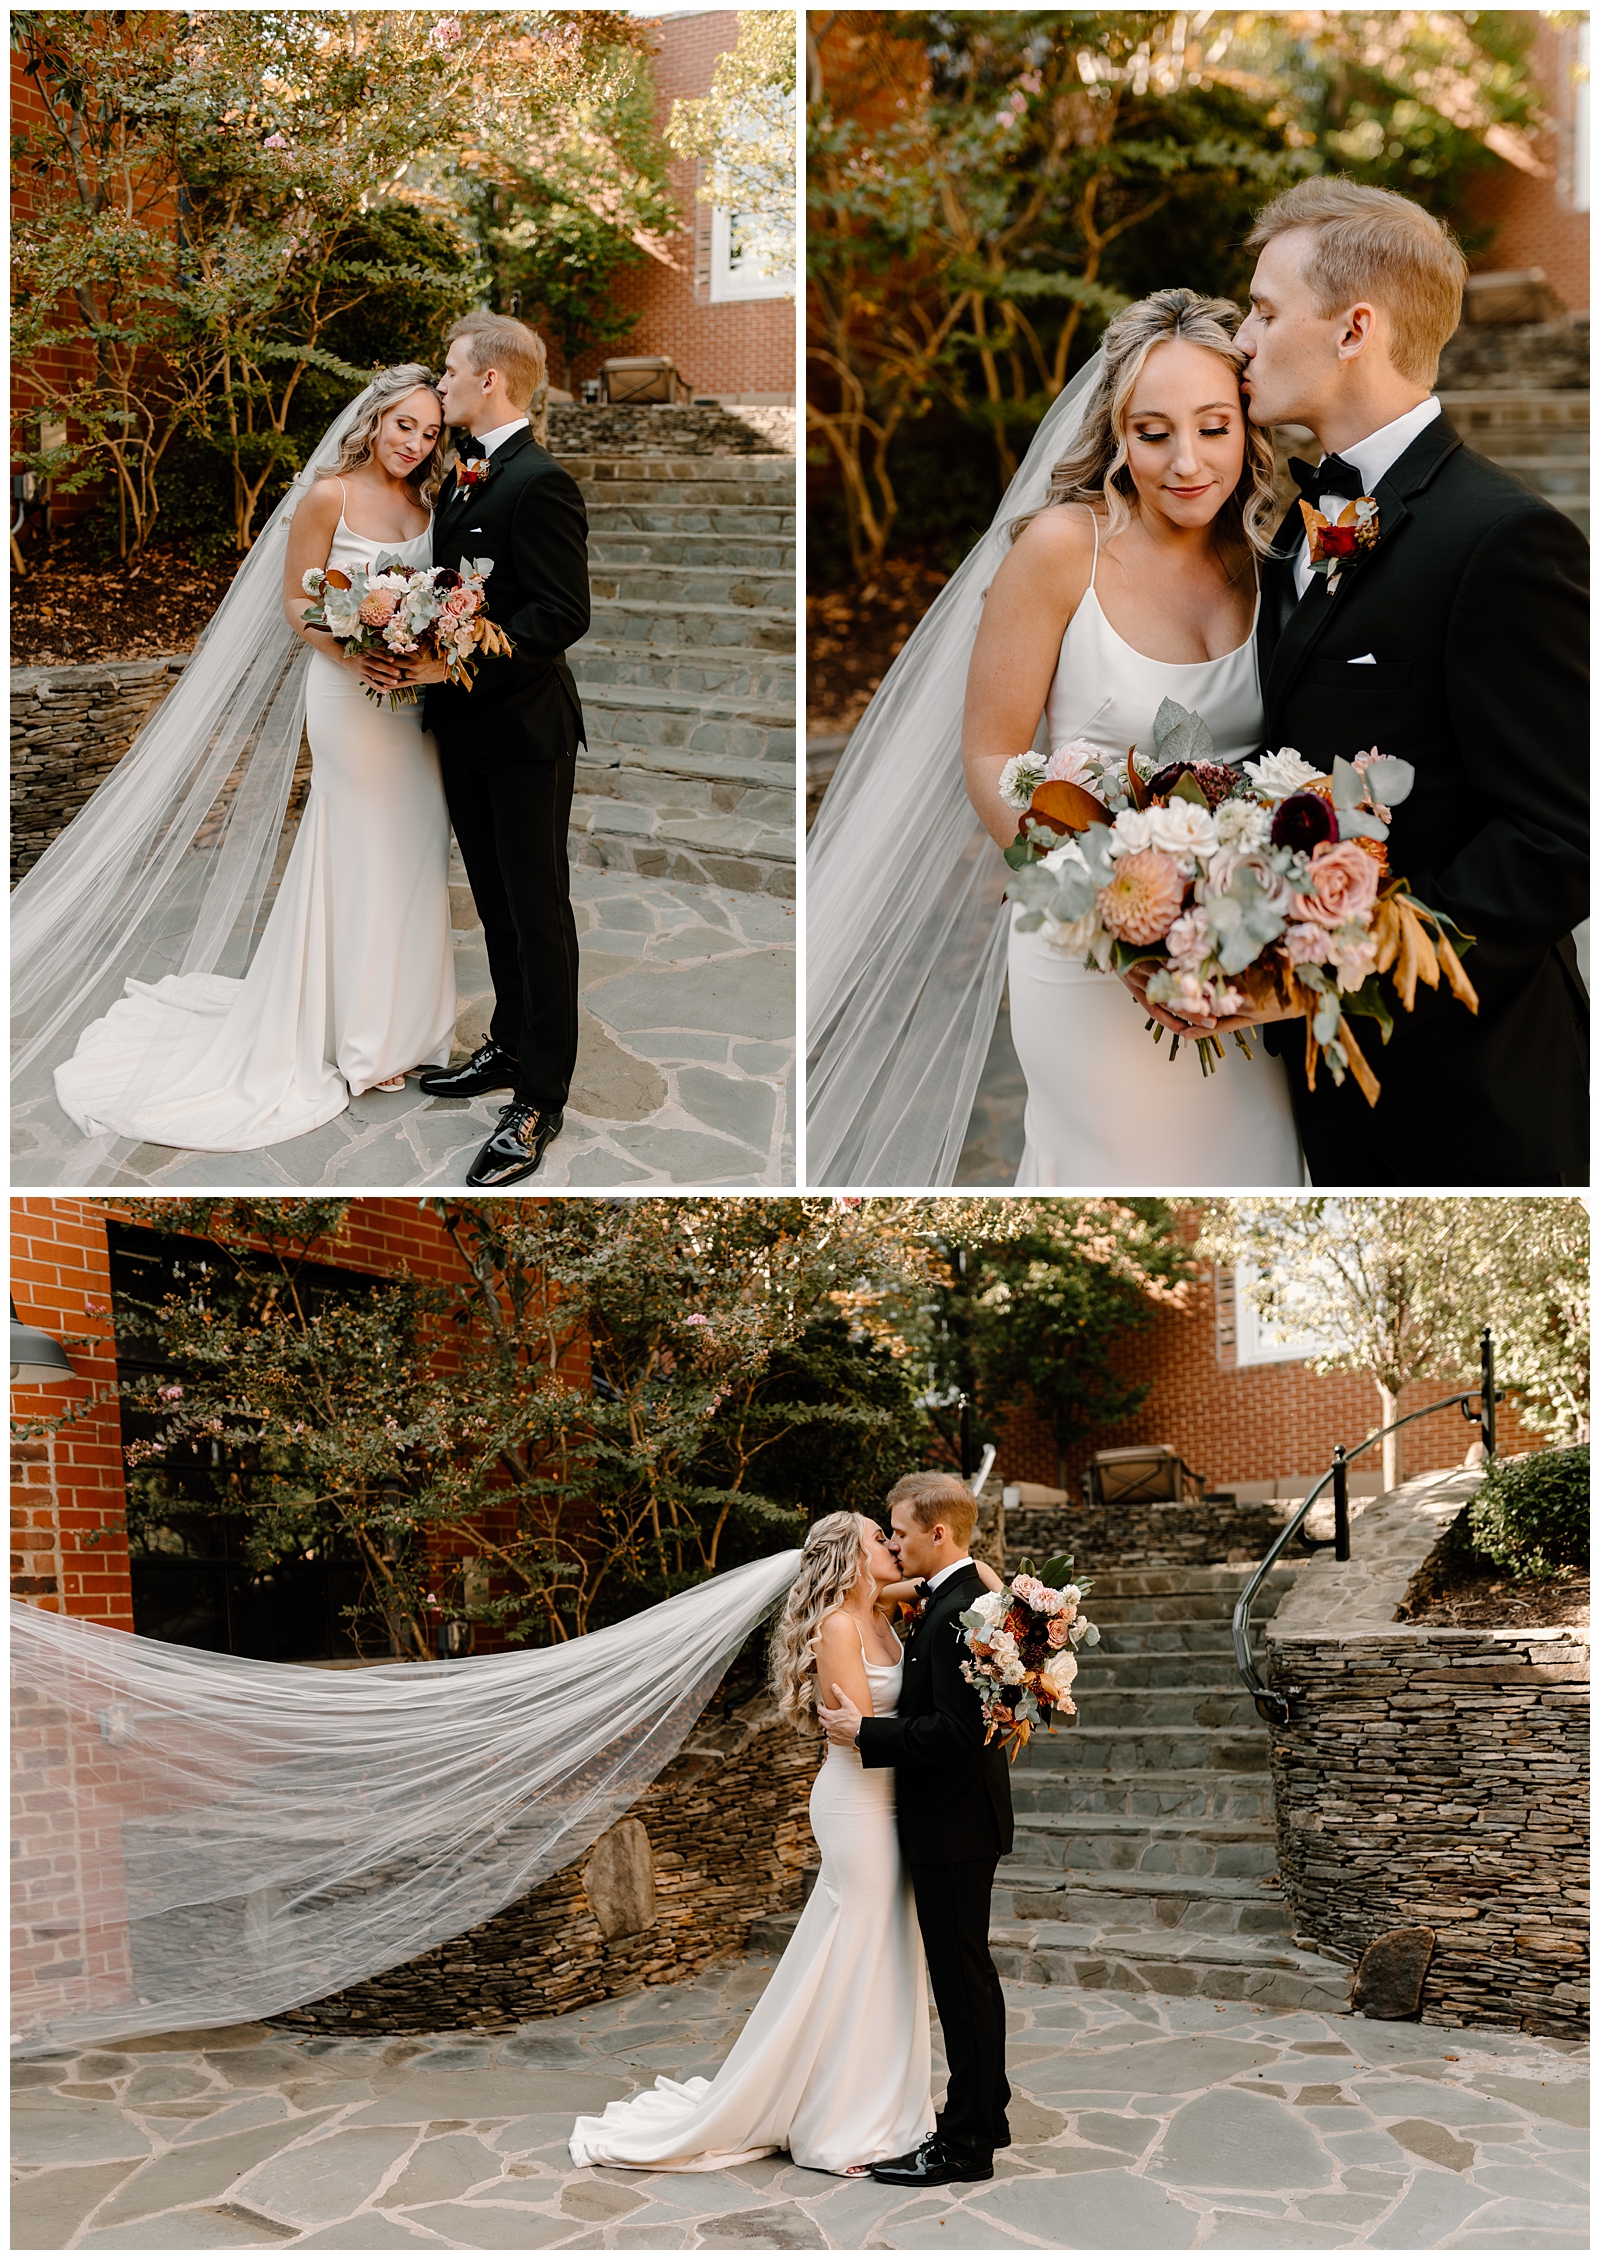 Fall bride and groom portraits at their classy modern wedding in North Carolina at Revolution Mill